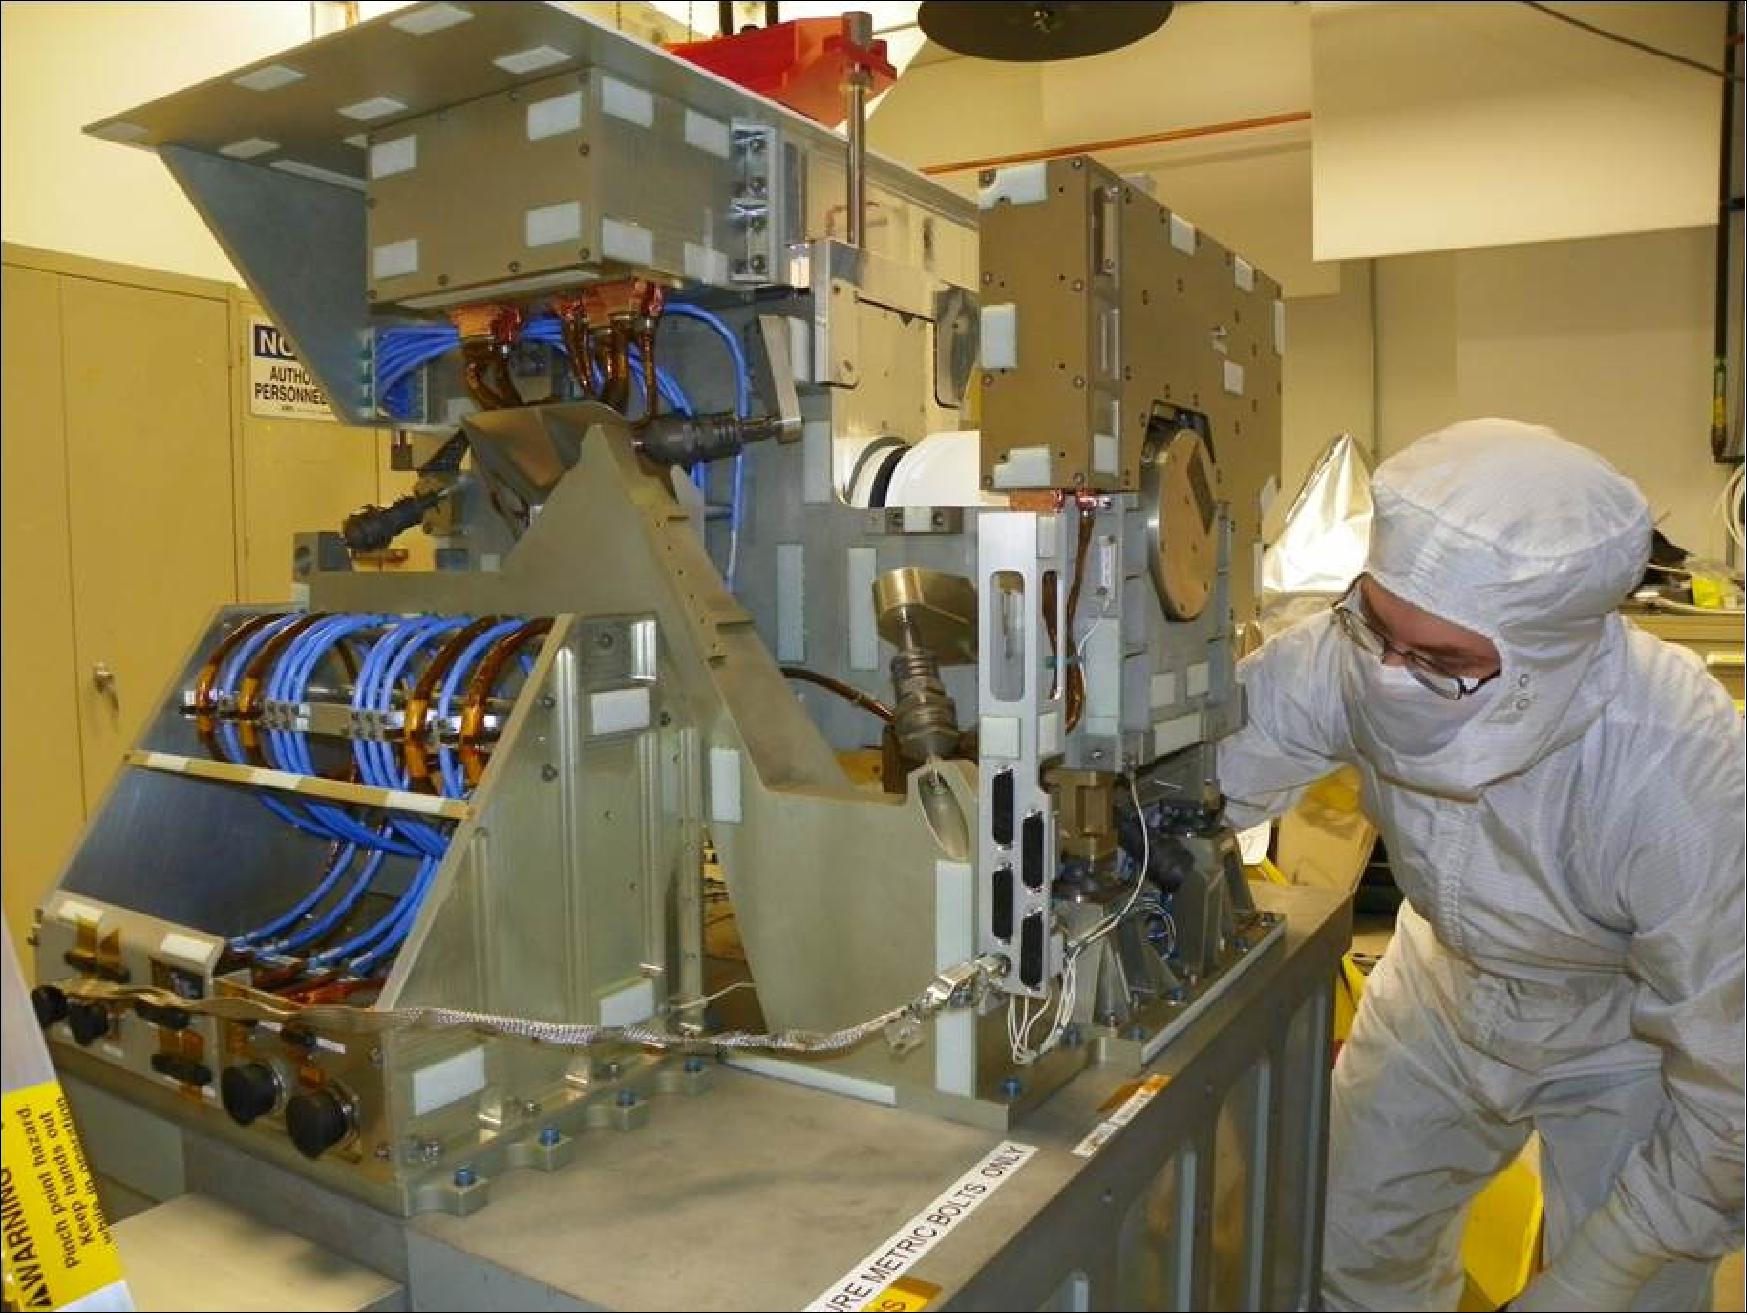 Figure 39: An engineer works on the CrIS instrument for the JPSS-2 satellite, which is slated to launch in March 2022. The CrIS instrument also flies on the Suomi-NPP satellite, and was recently restored to full capability after getting damaged while on orbit (image credit: L3Harris Technologies)